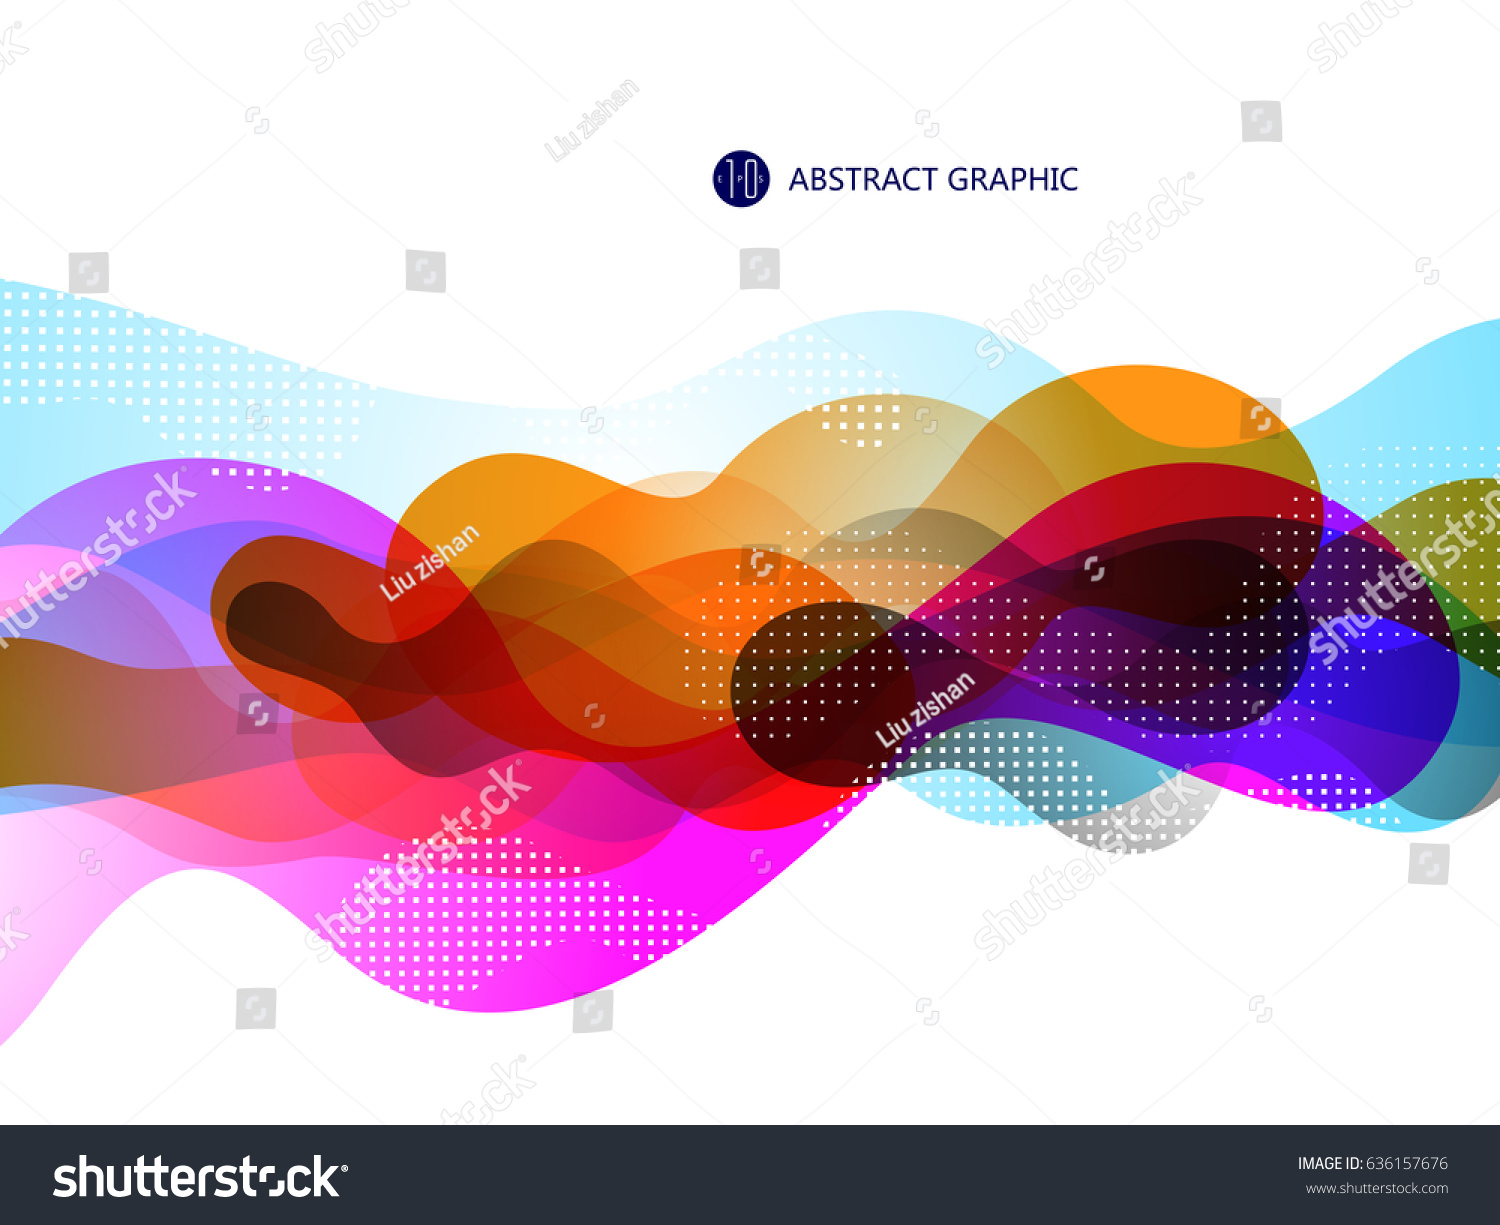 Bubble like abstract graphic design, background. #636157676